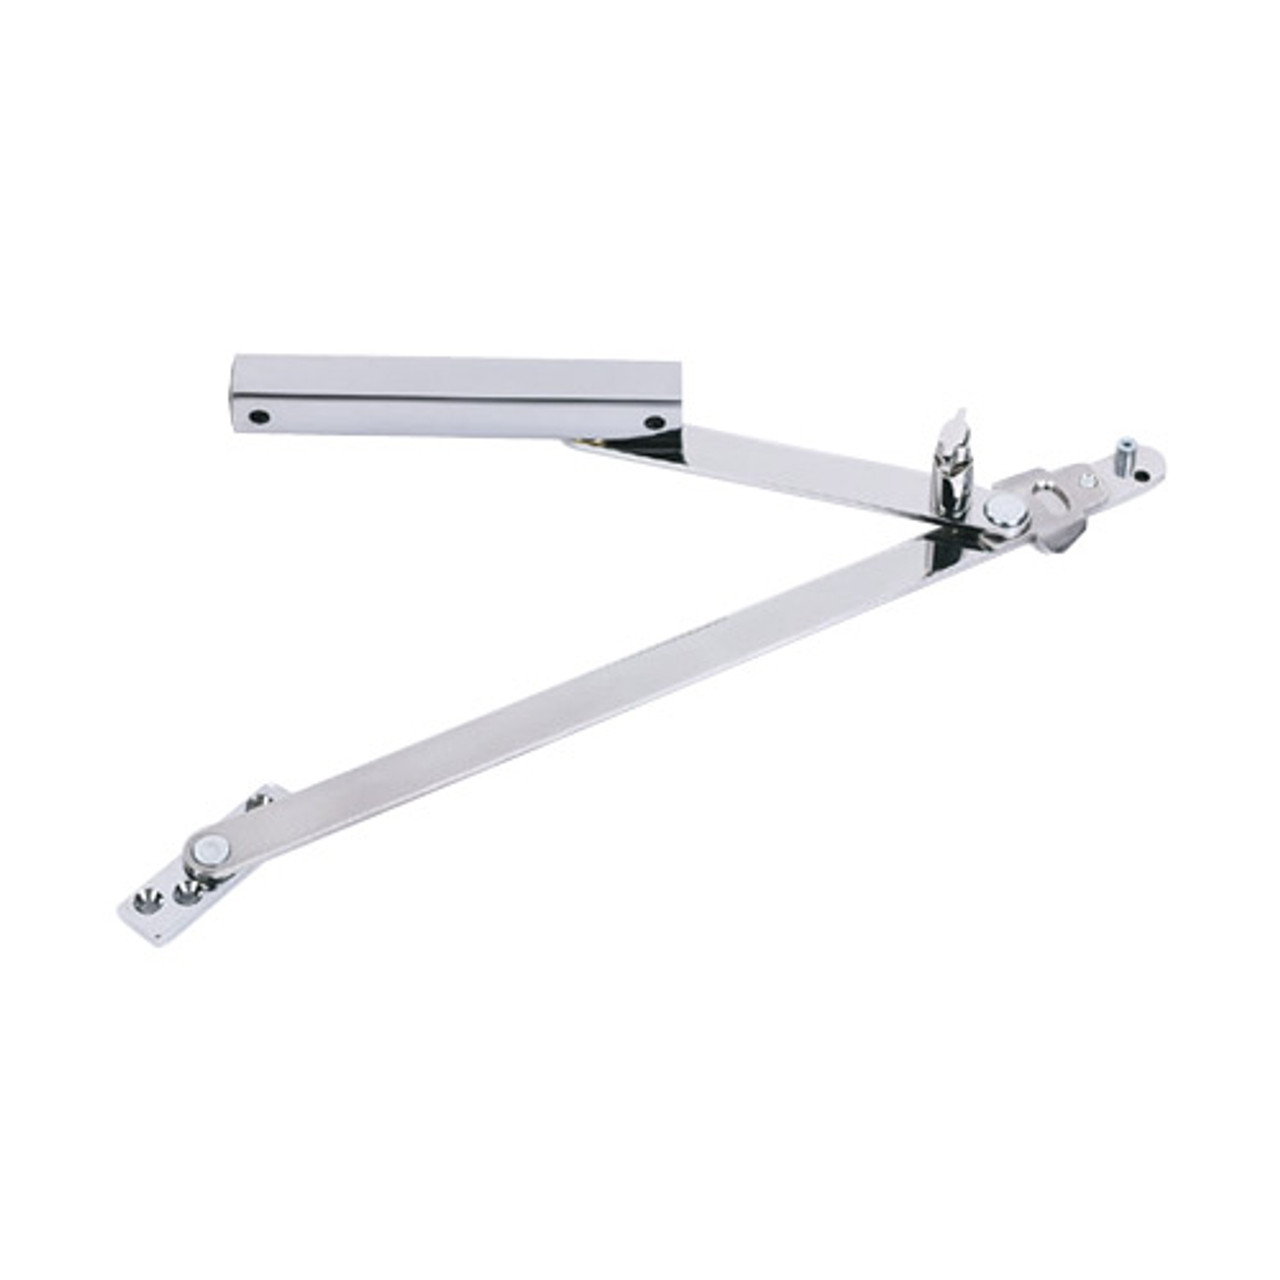 815H-US32-SHIM-3 Glynn Johnson 81 Series Heavy Duty Surface Overhead in Bright Stainless Steel